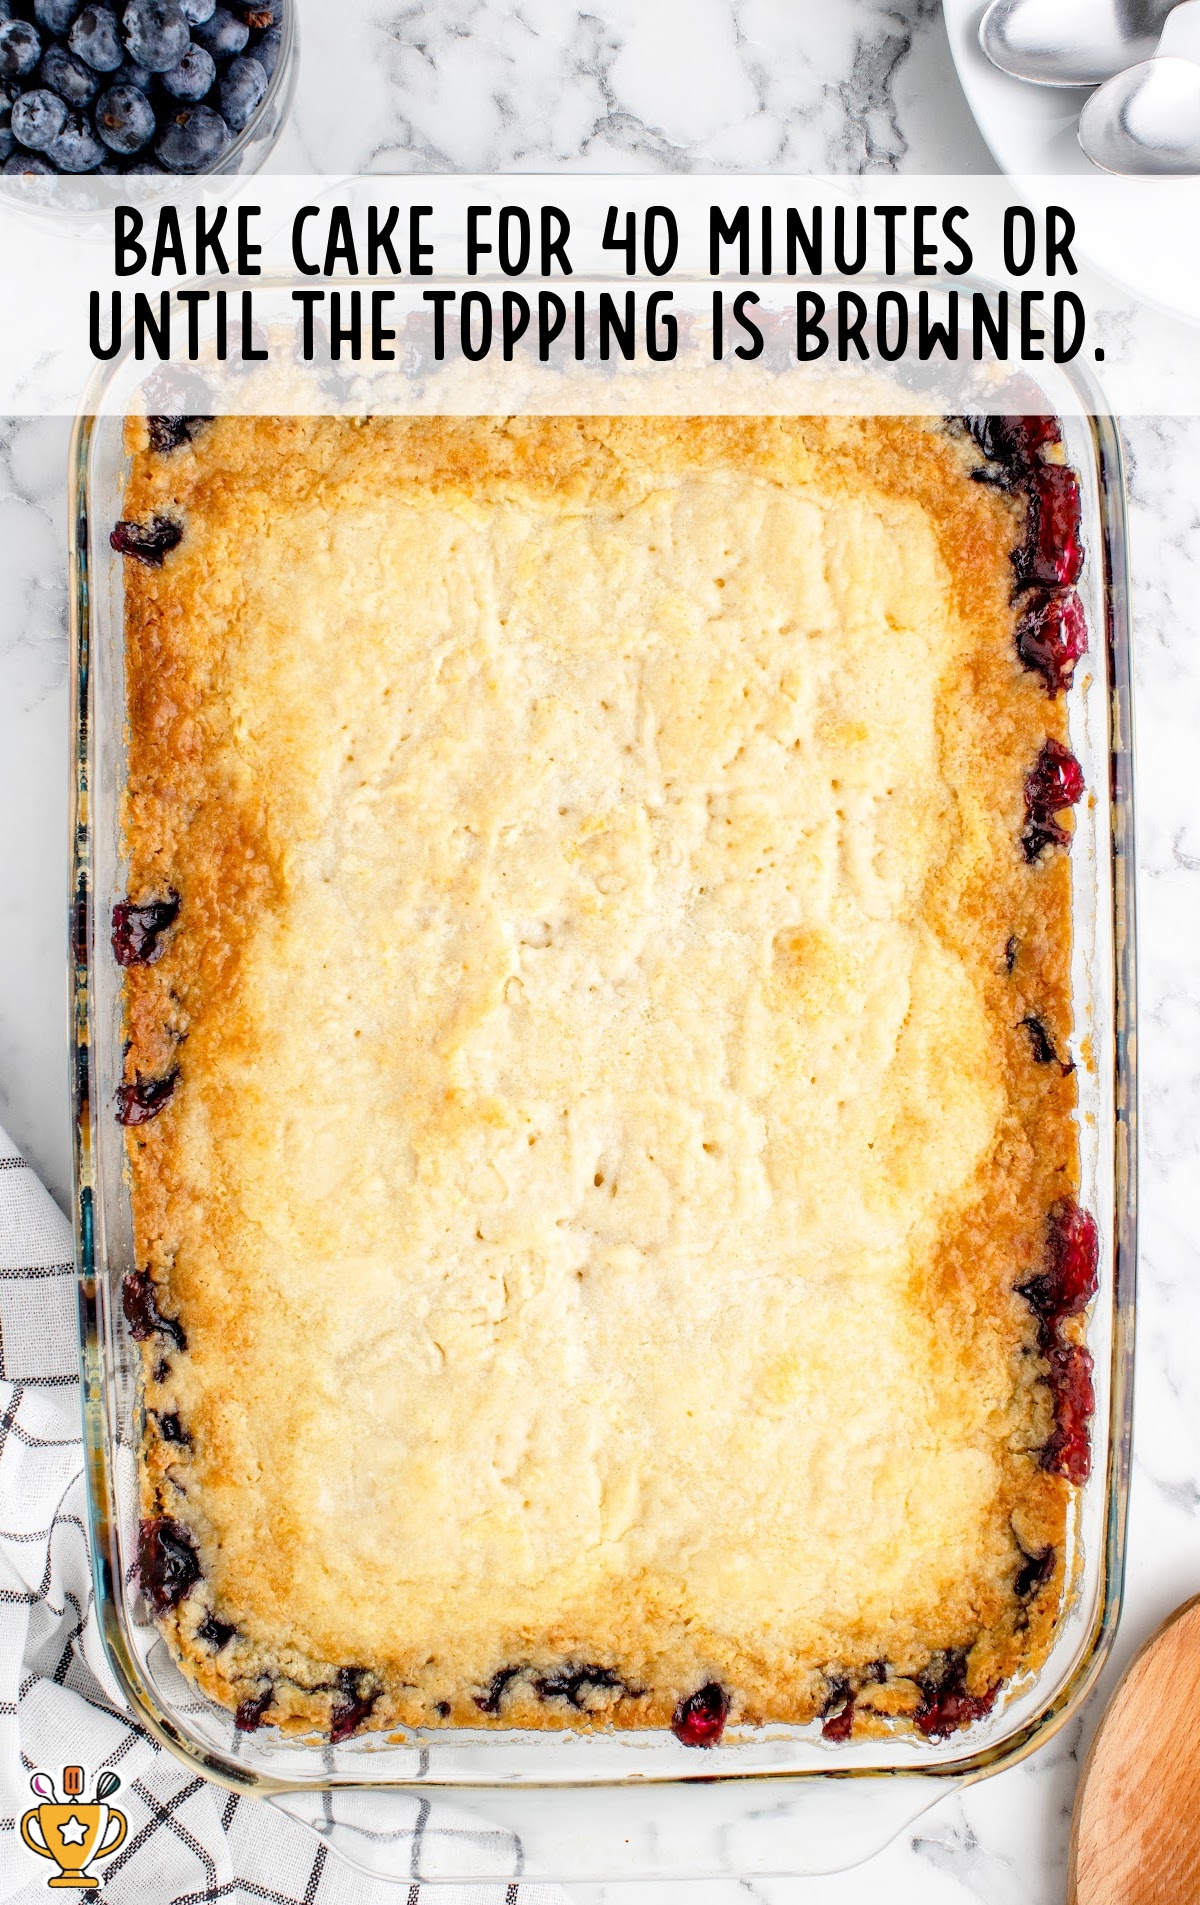 oven baked blueberry cream cheese dump cake with a golden crust in a 9x13 baking dish